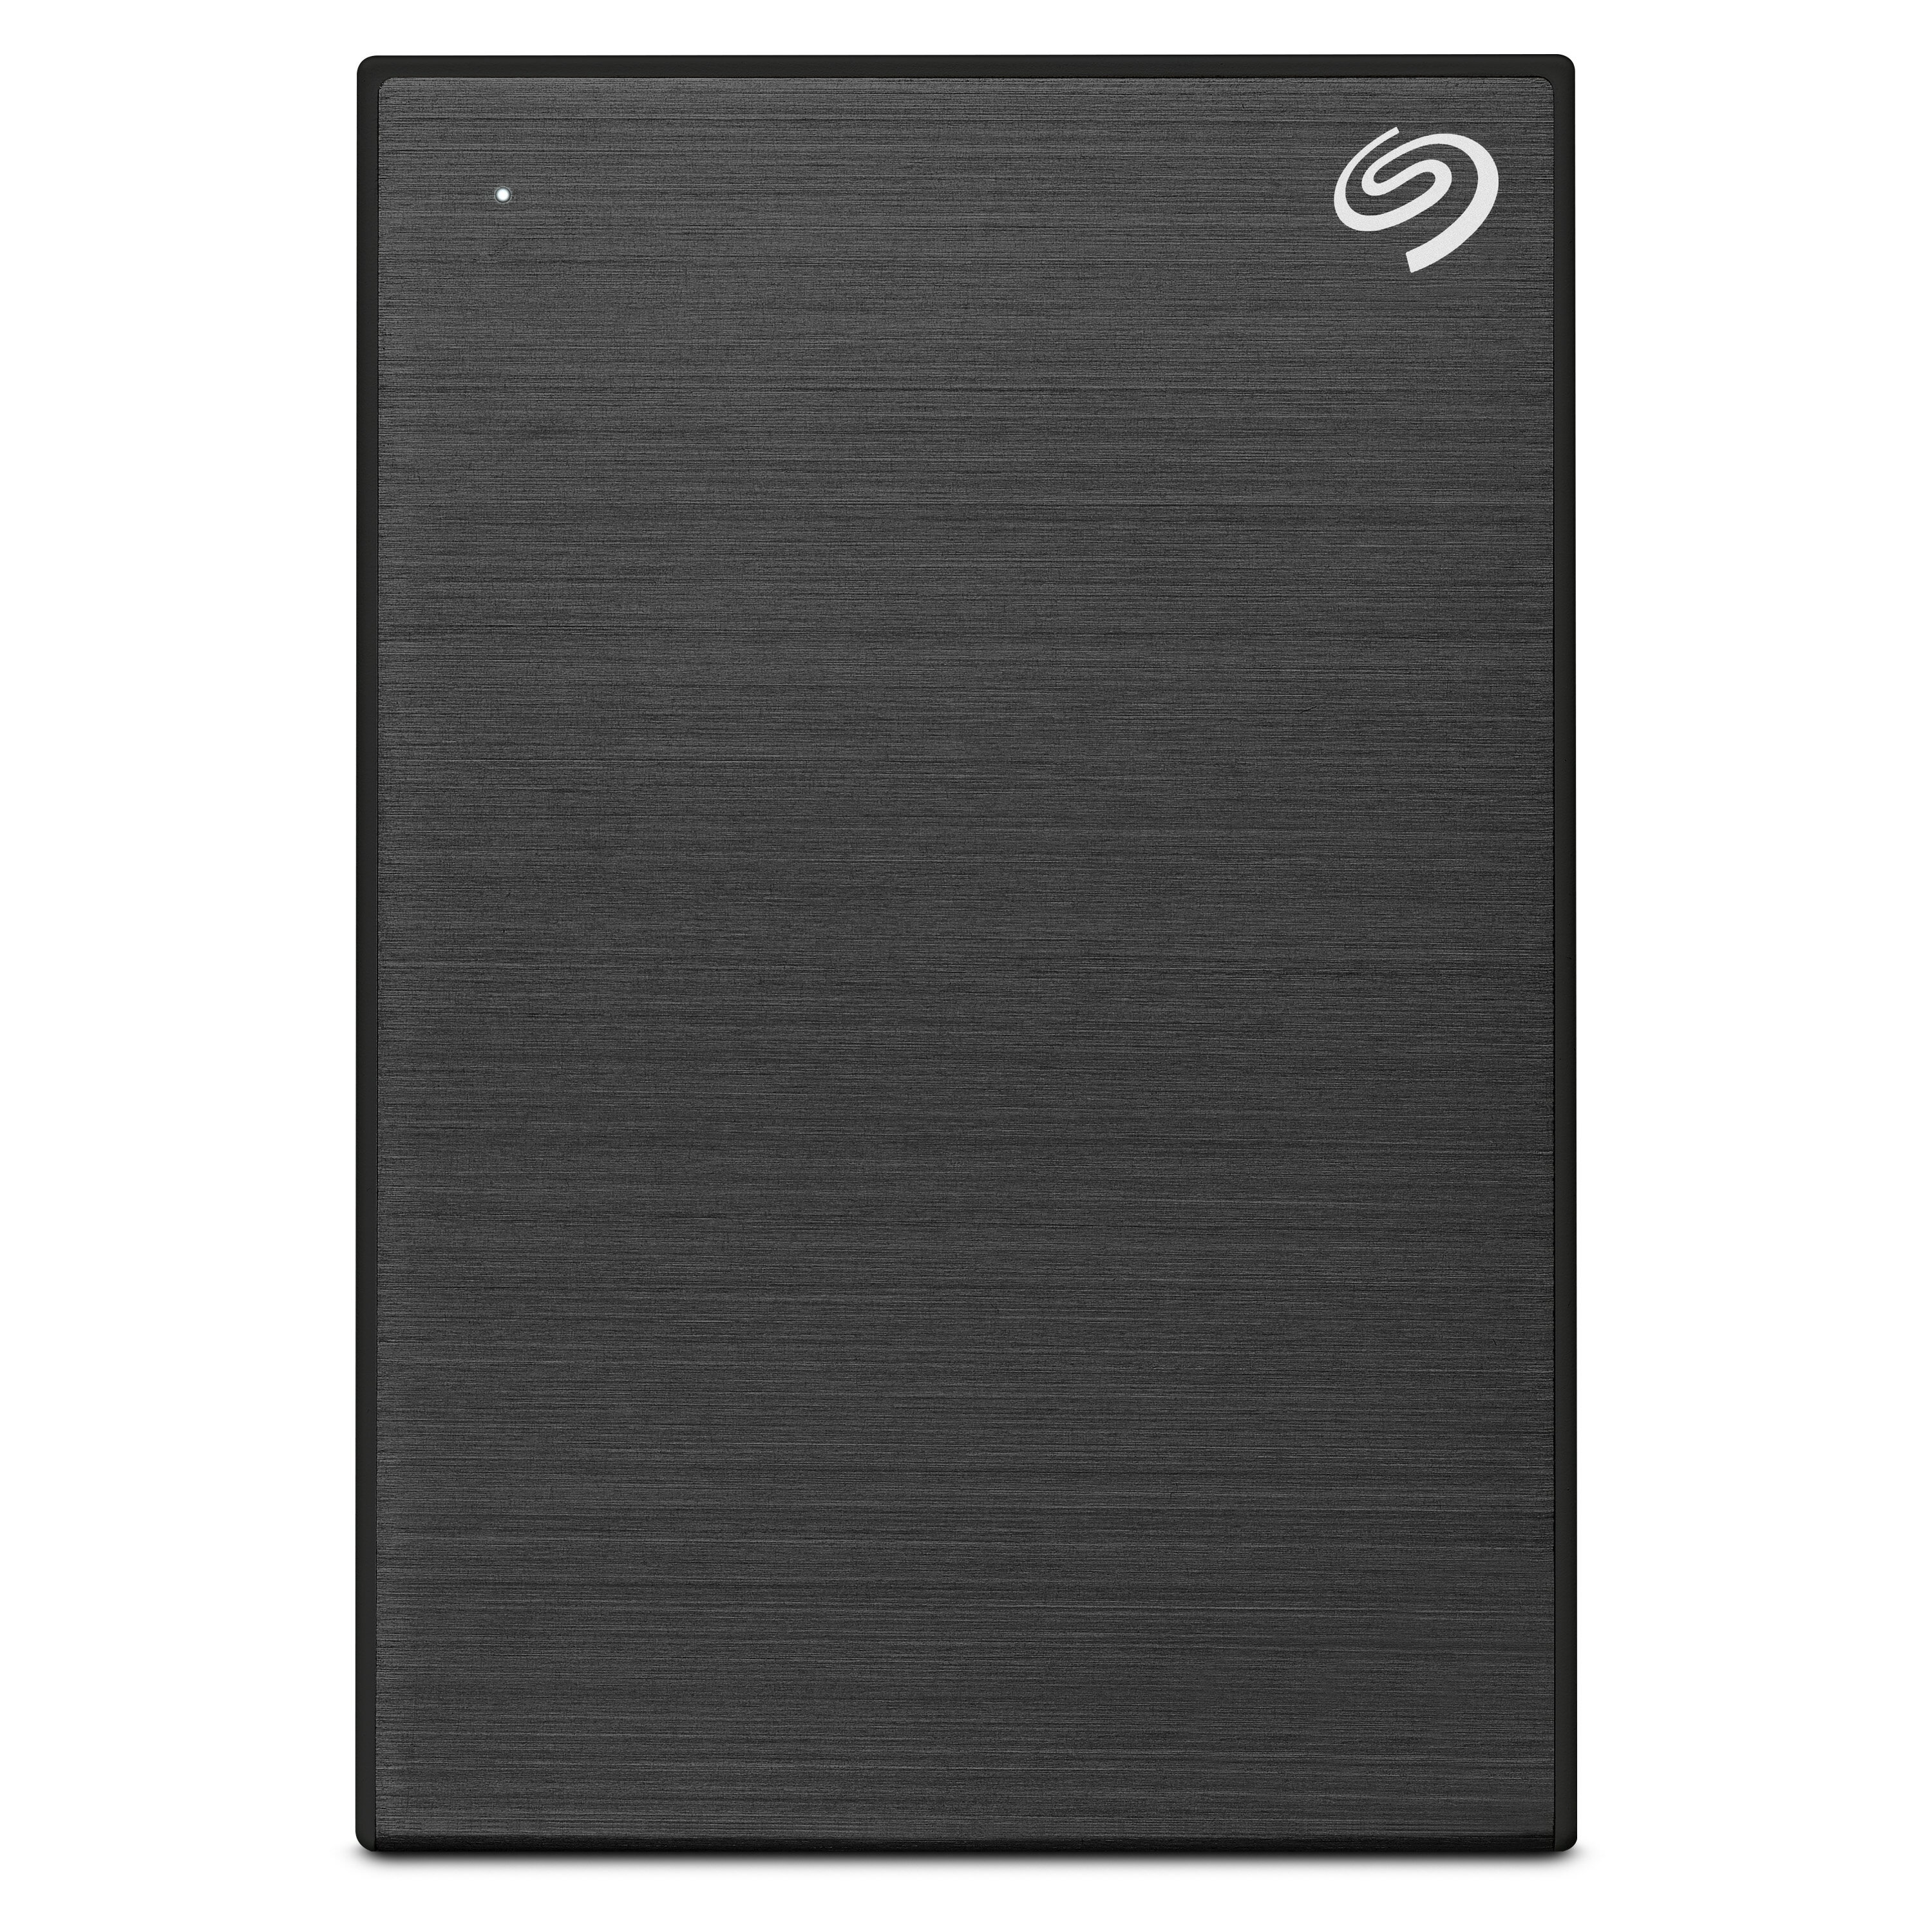 Seagate シーゲイト One Touch HDD パスワ